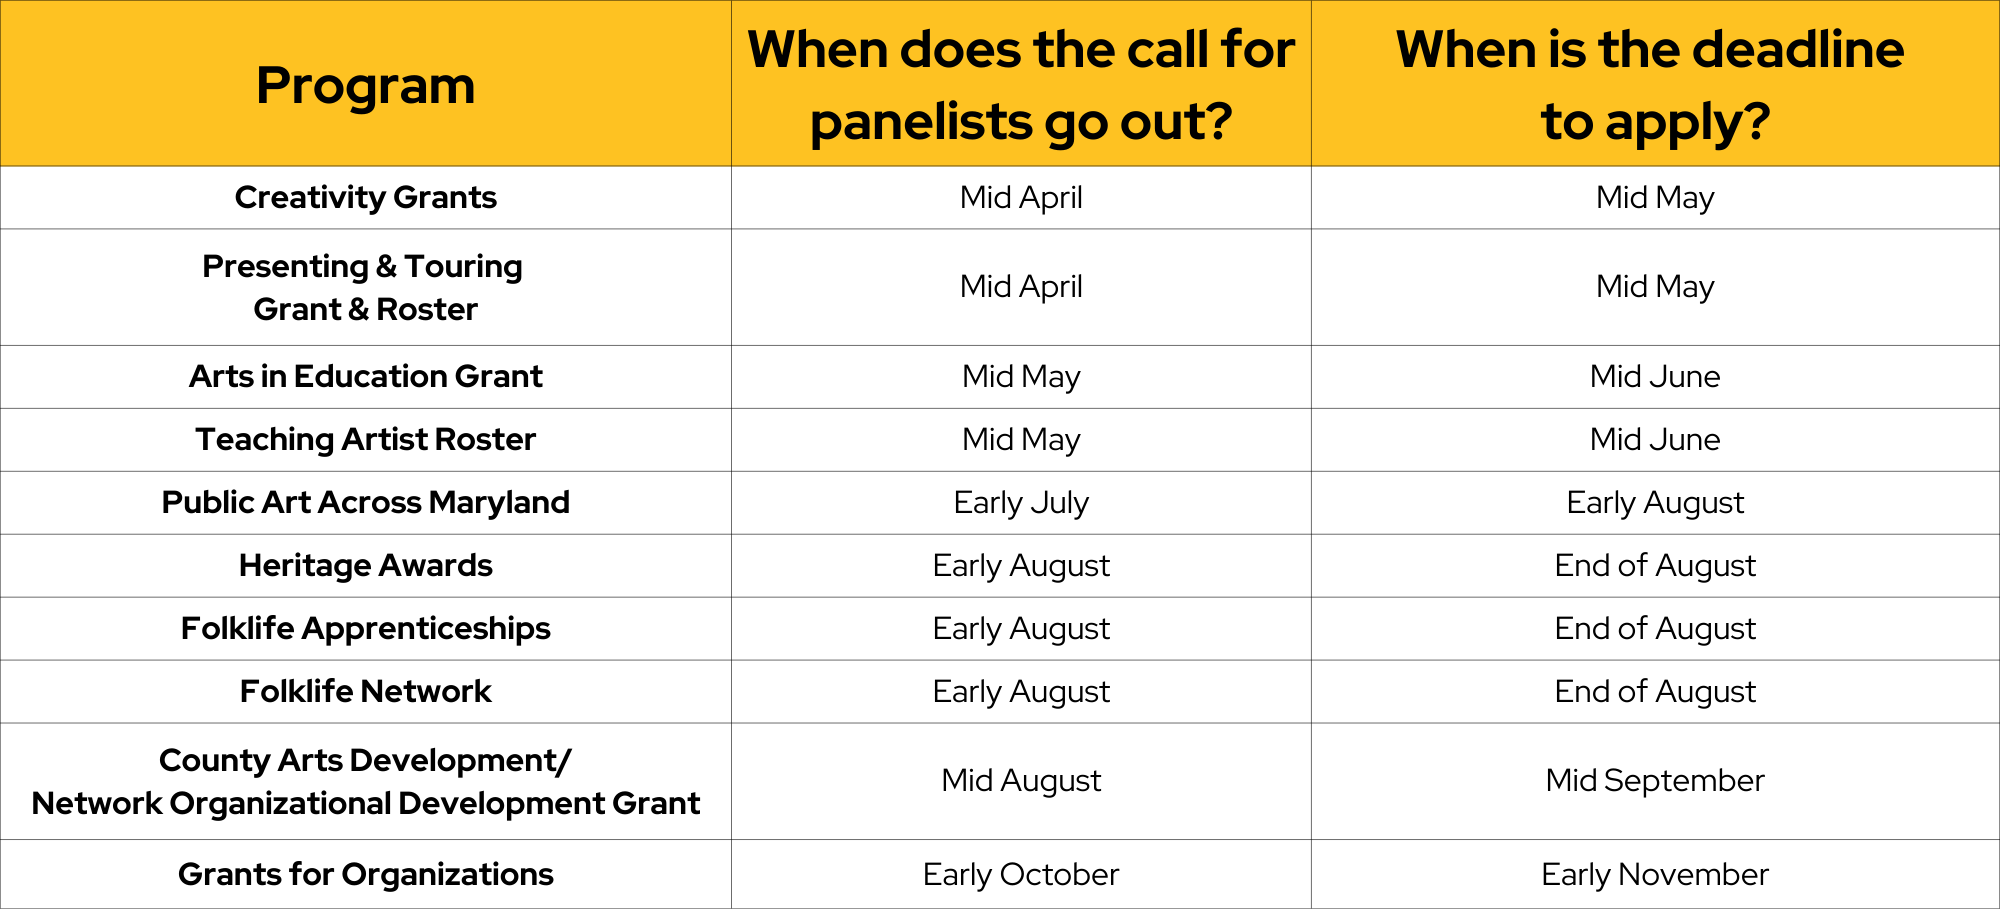 Chart listing the calls for panelists by Program, dates open & dates closed 